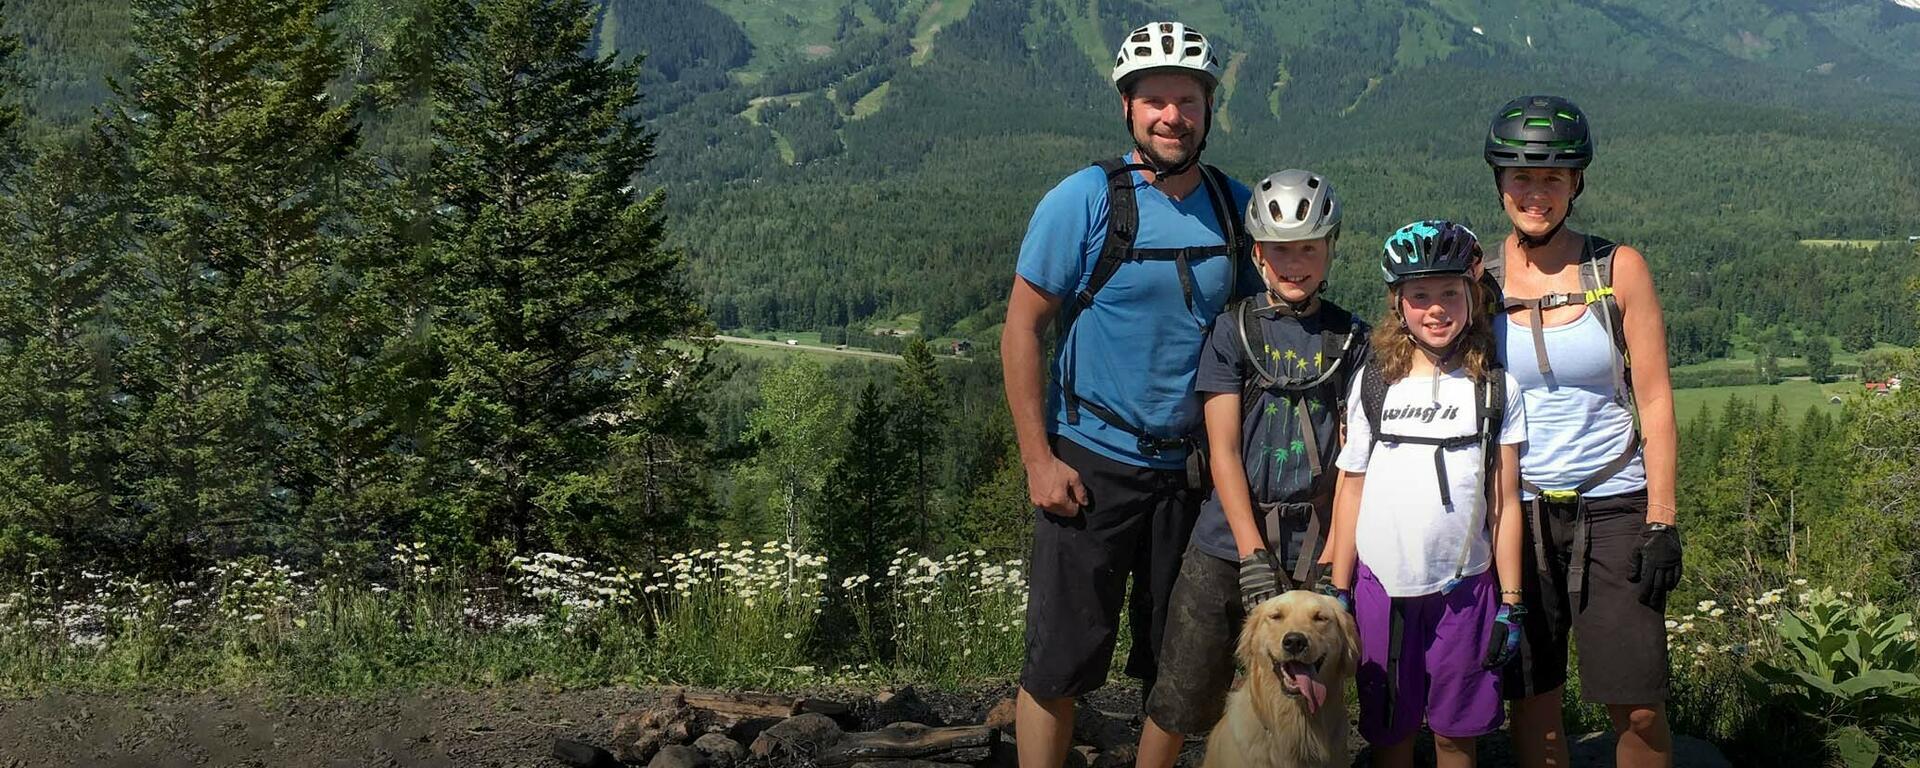 Mike McClay standing with his wife, two young kids and dog in front of a forest and mountains.